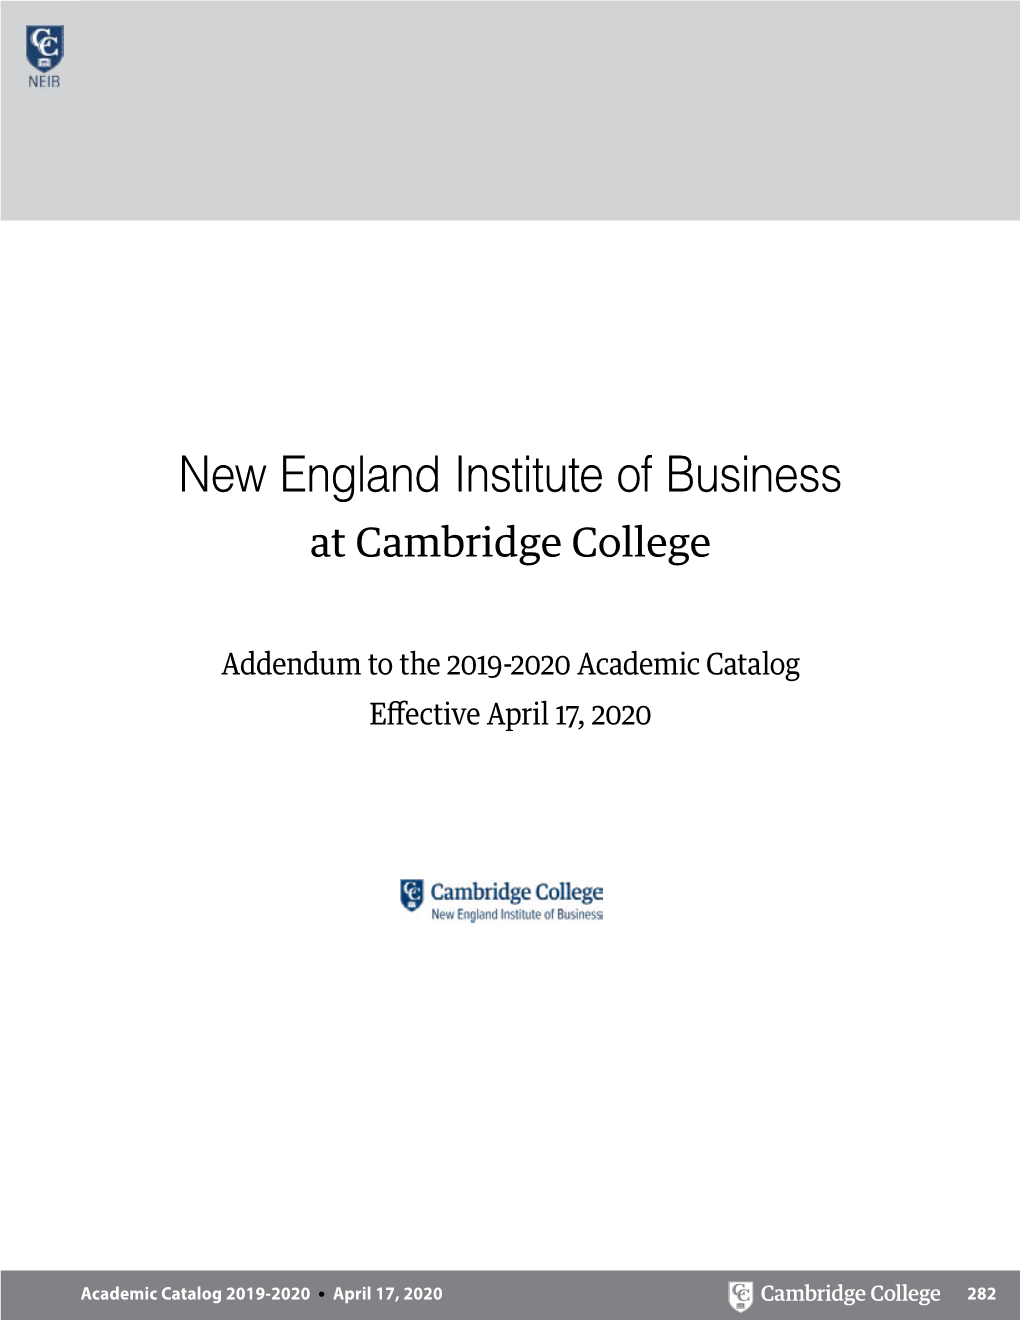 New England Institute of Business at Cambridge College